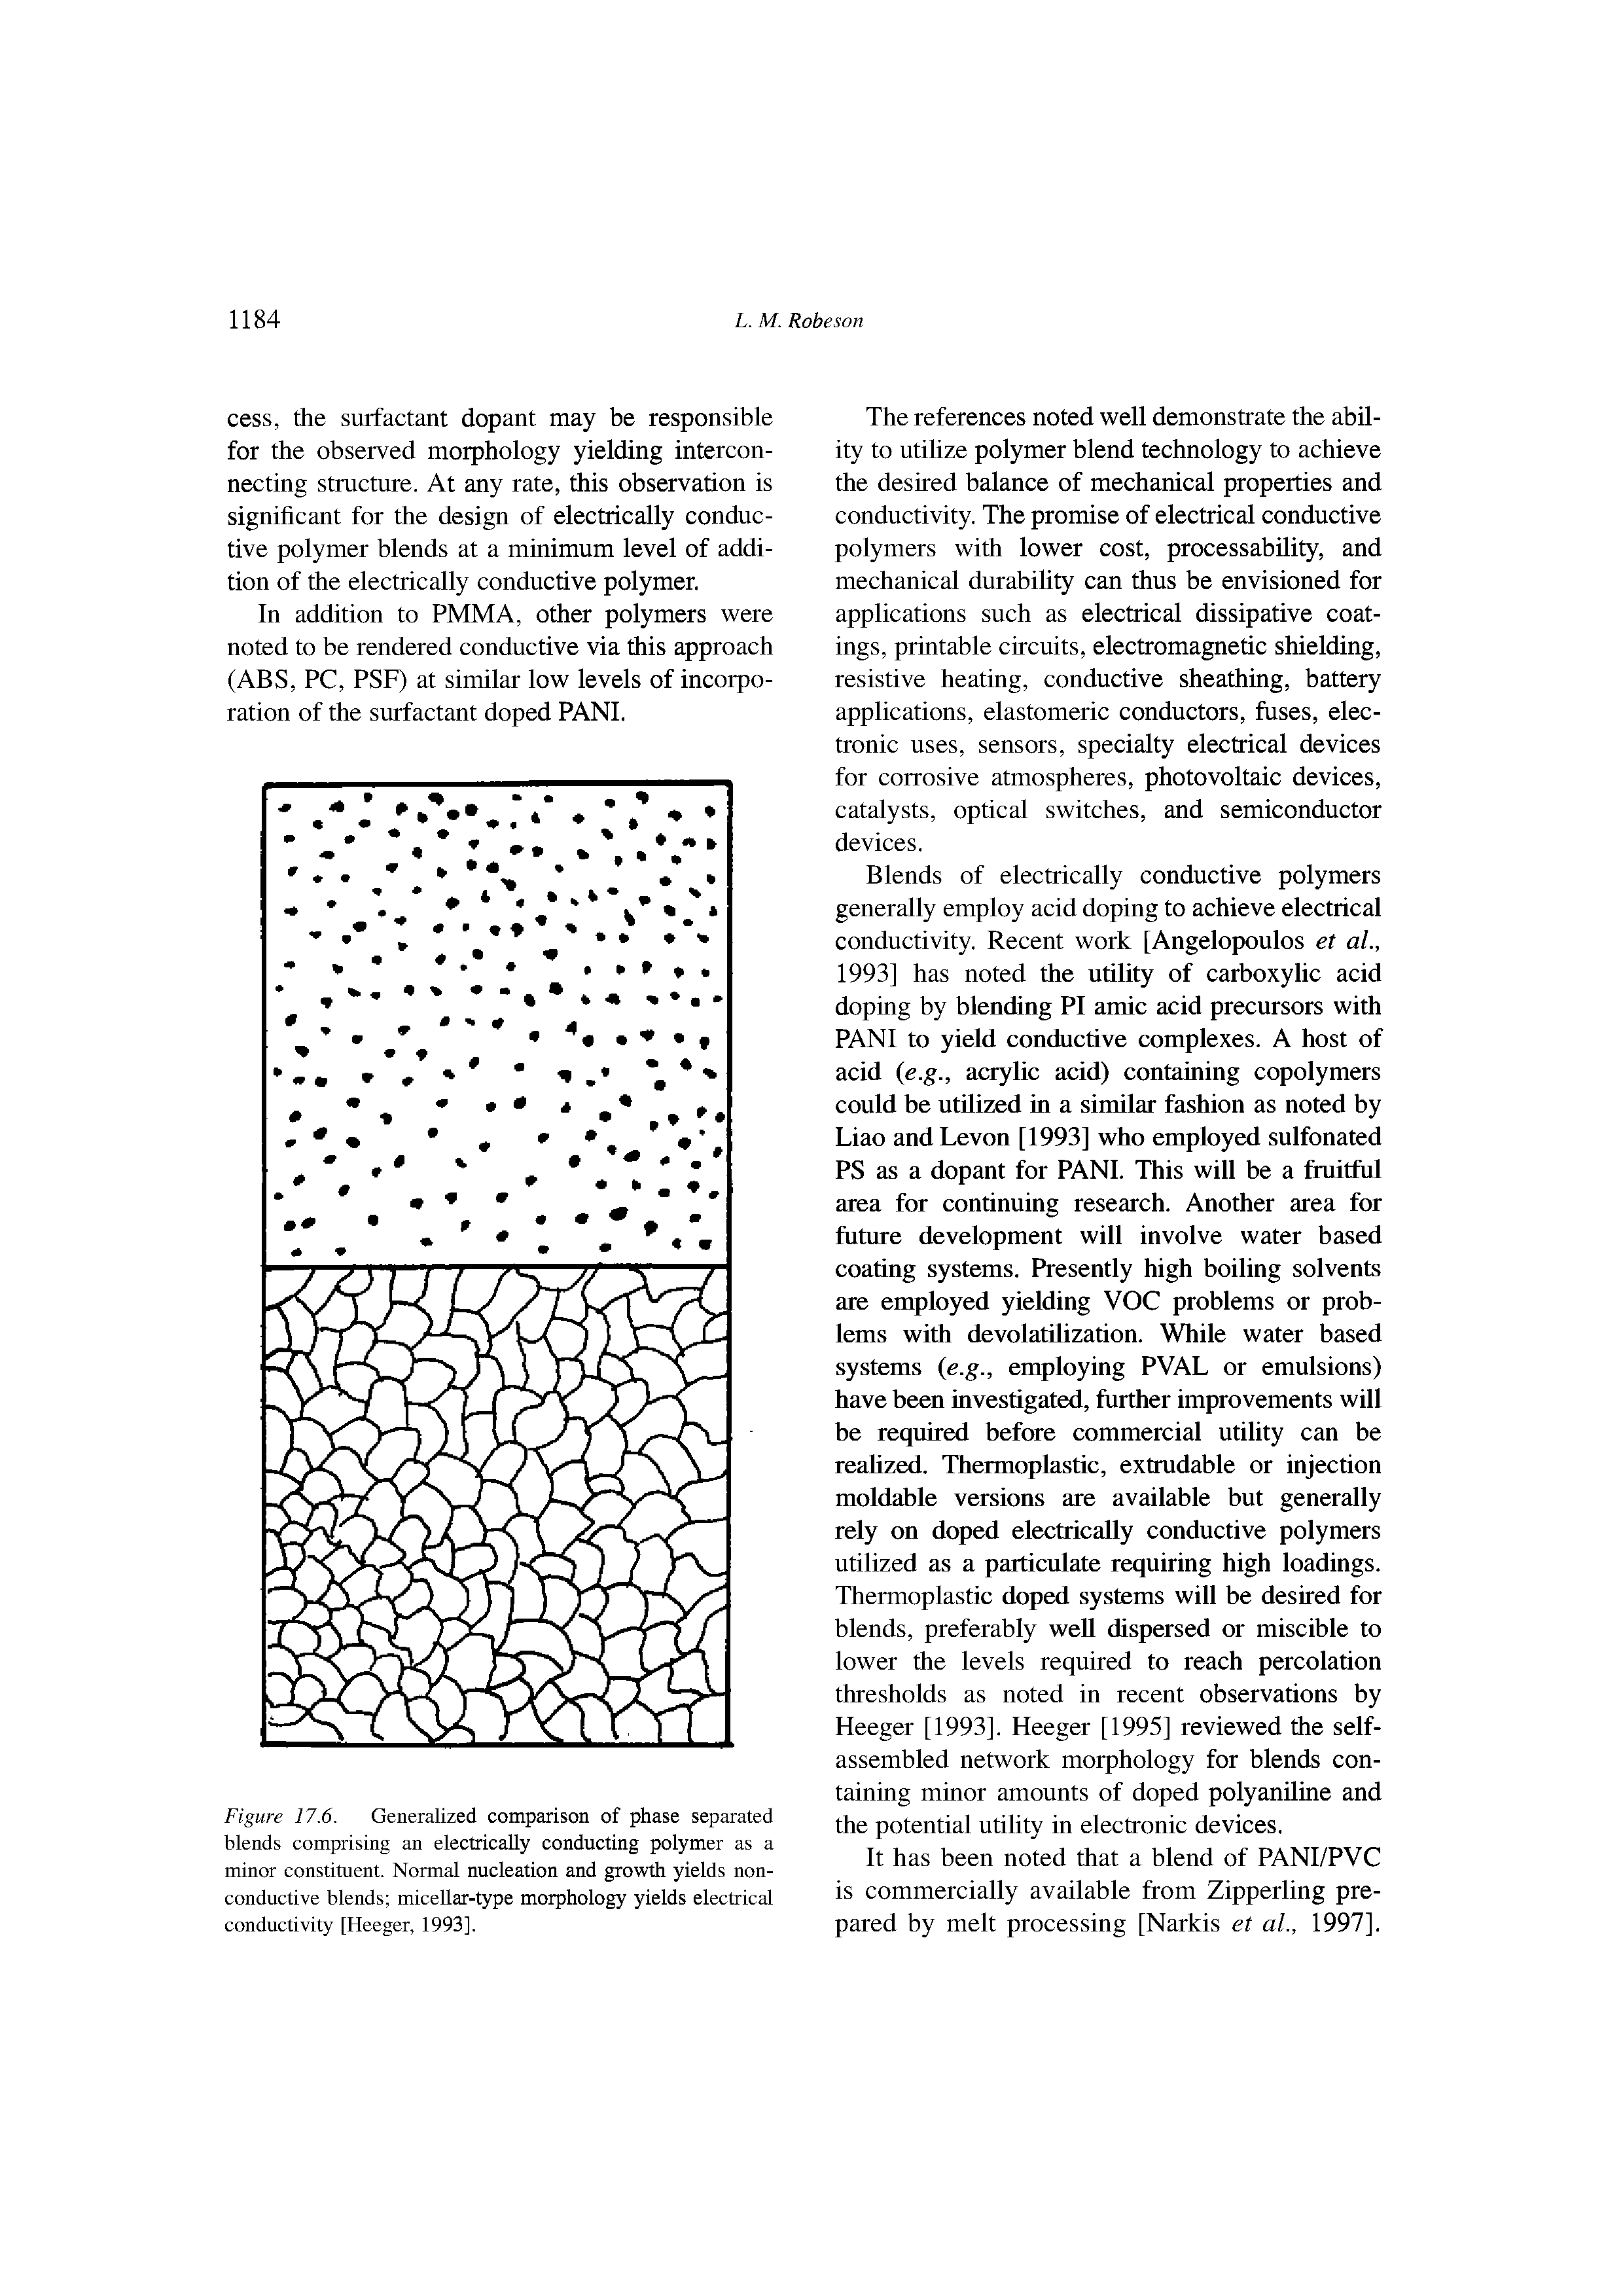 Figure 17.6. Generalized comparison of phase separated blends comprising an electrically conducting polymer as a minor constituent. Normal nucleation and growth yields non-conductive blends micellar-type morphology yields electrical conductivity [Heeger, 1993].